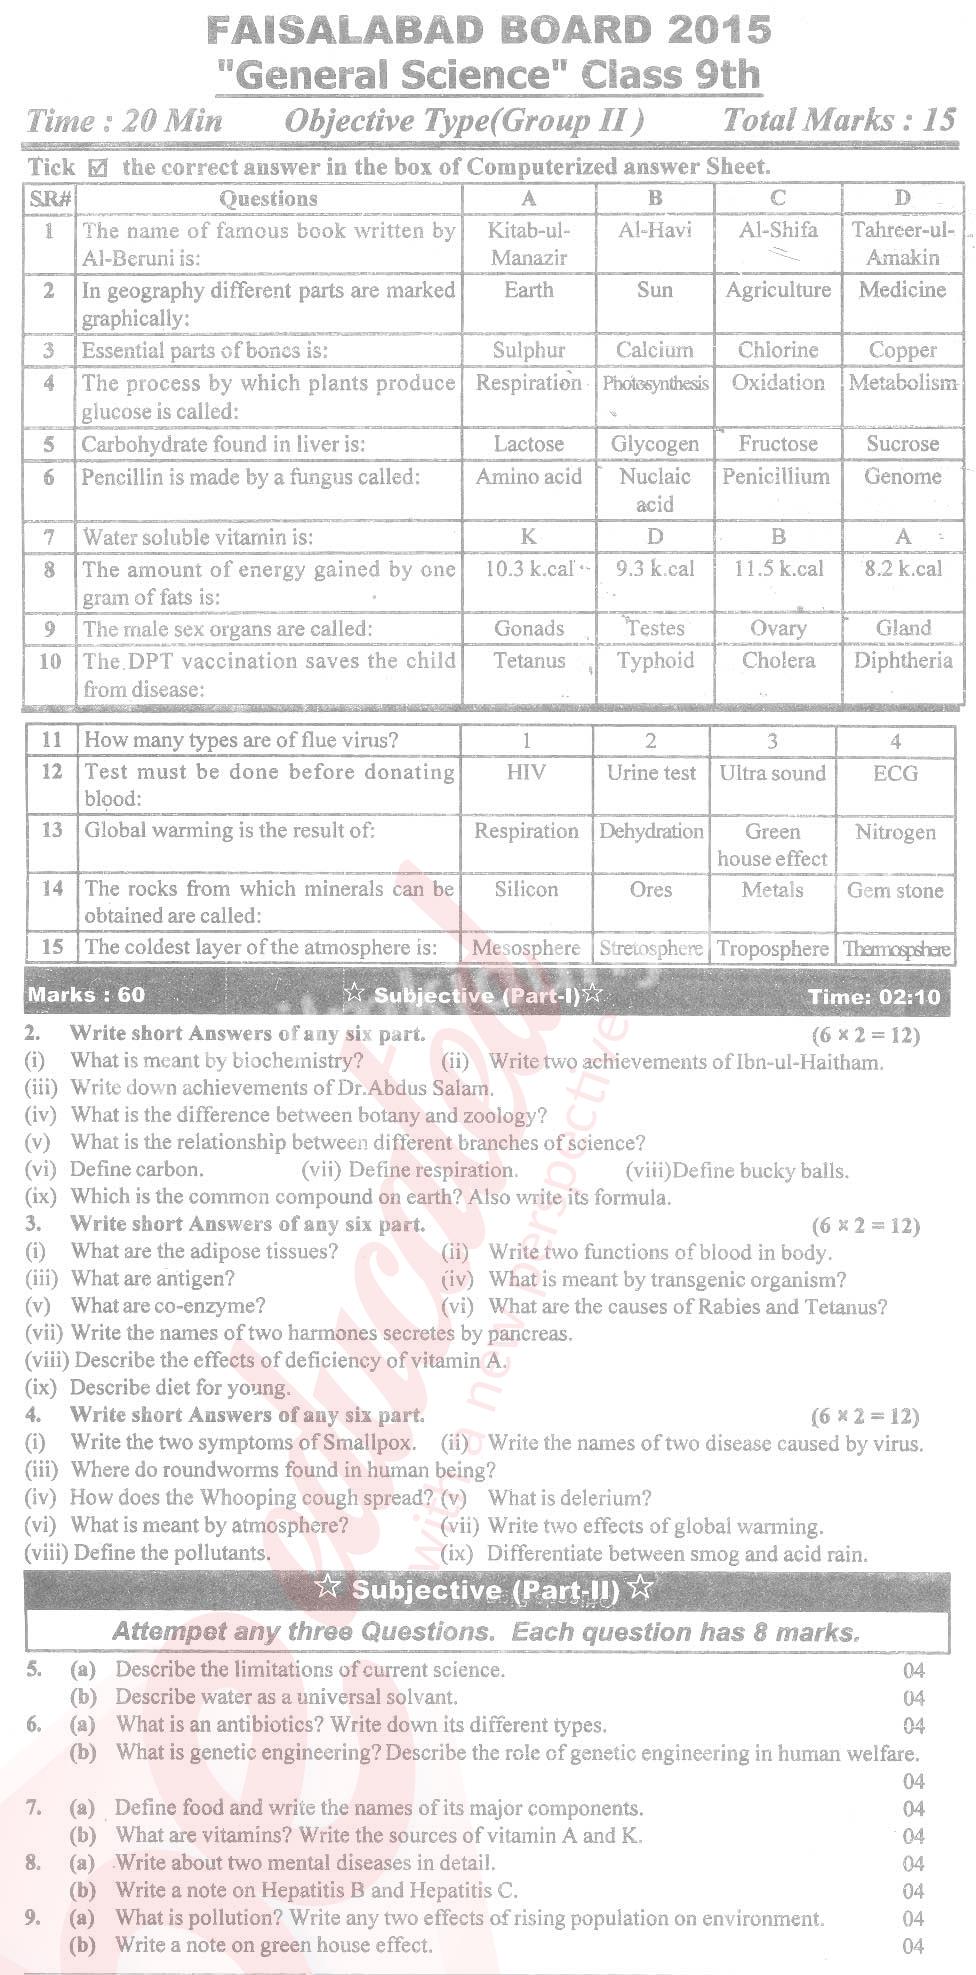 General Science 9th English Medium Past Paper Group 2 BISE Faisalabad 2015